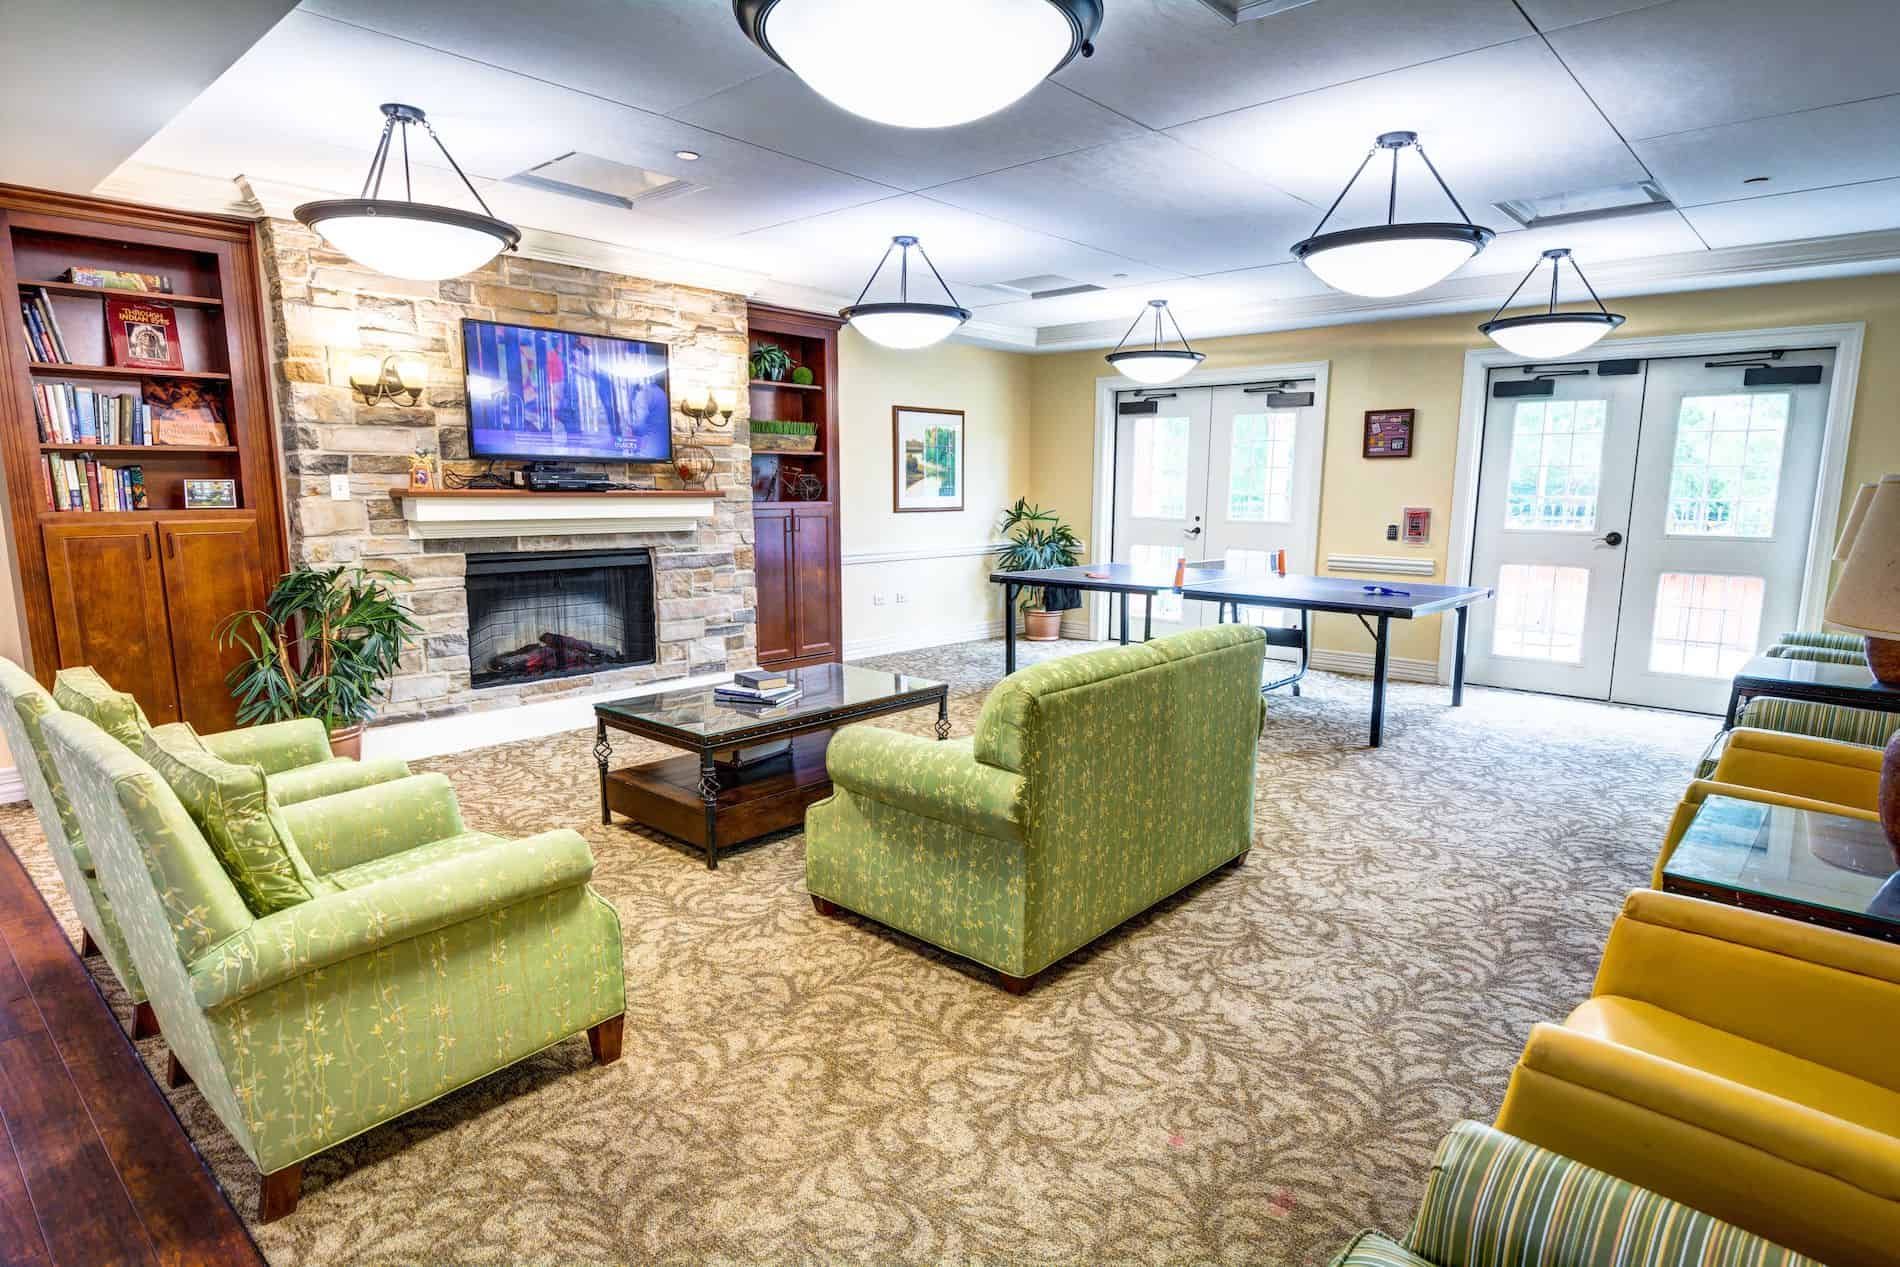 Senior enjoying a cozy living room with modern decor and fireplace at The Auberge At Naperville.